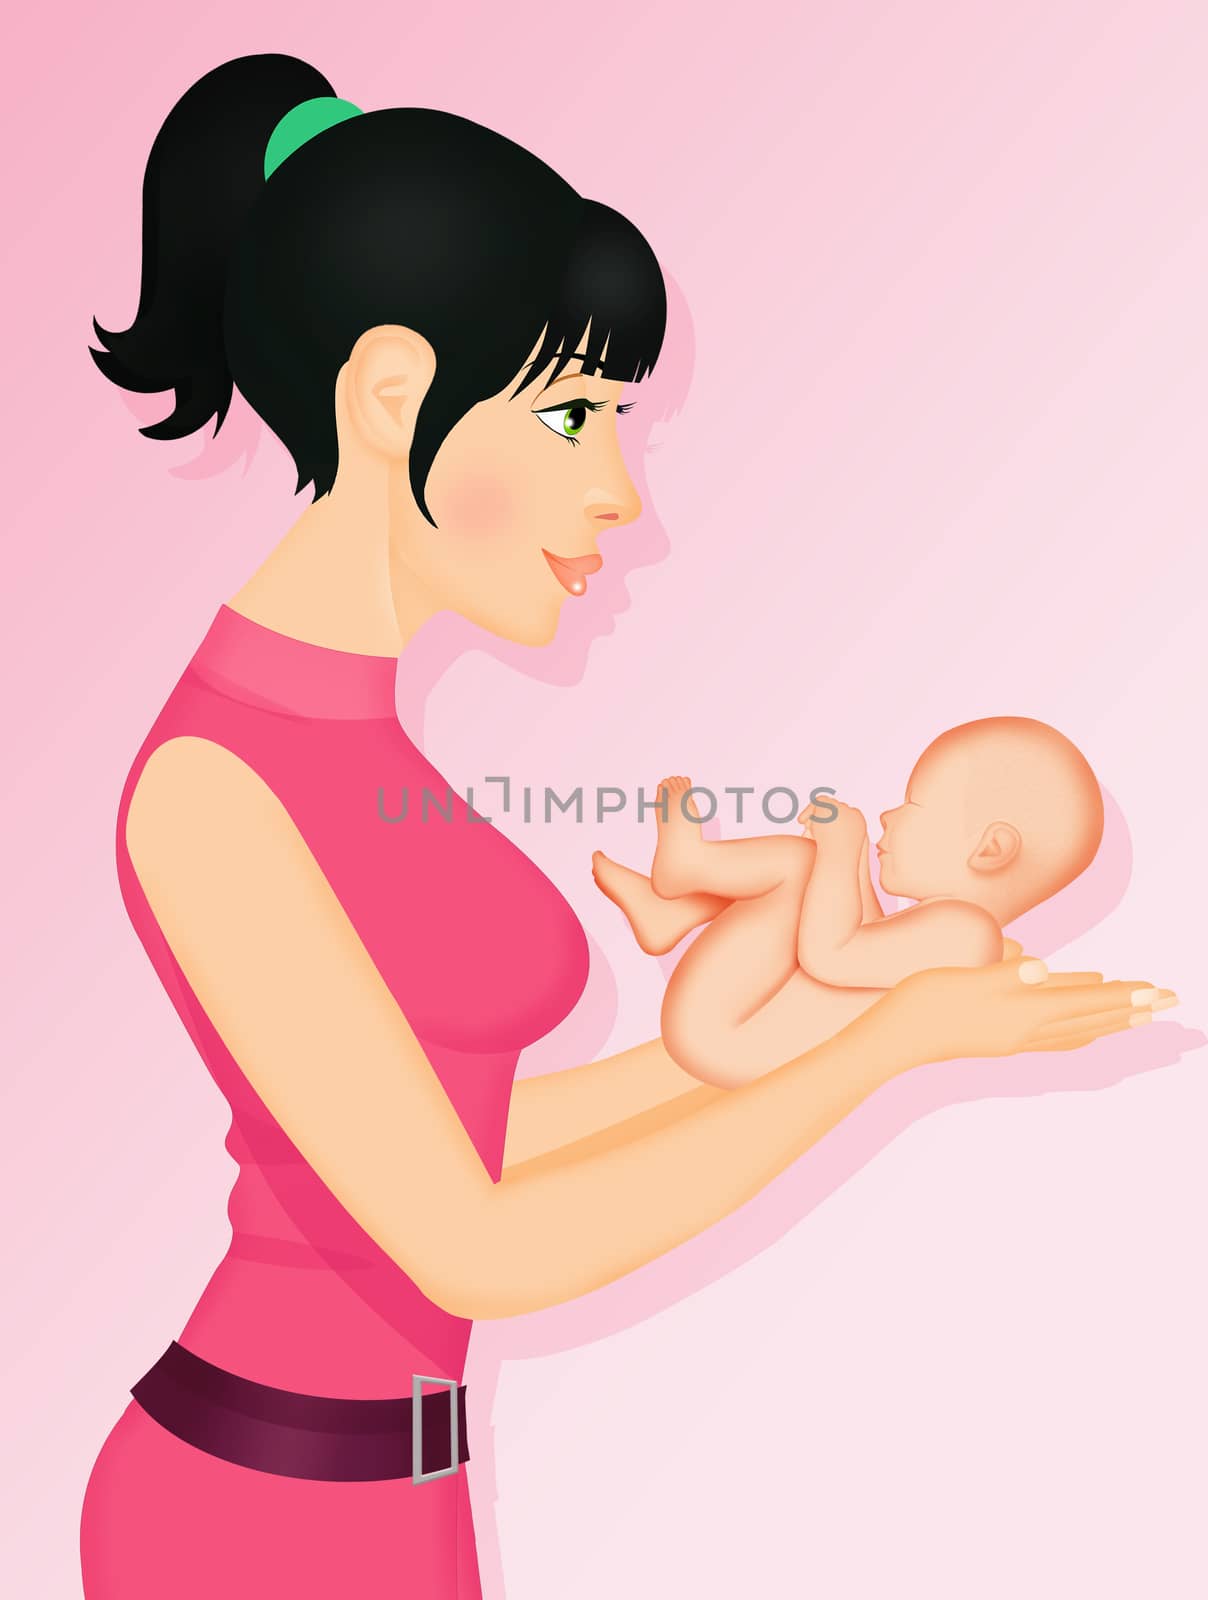 woman with baby born in her hands by adrenalina